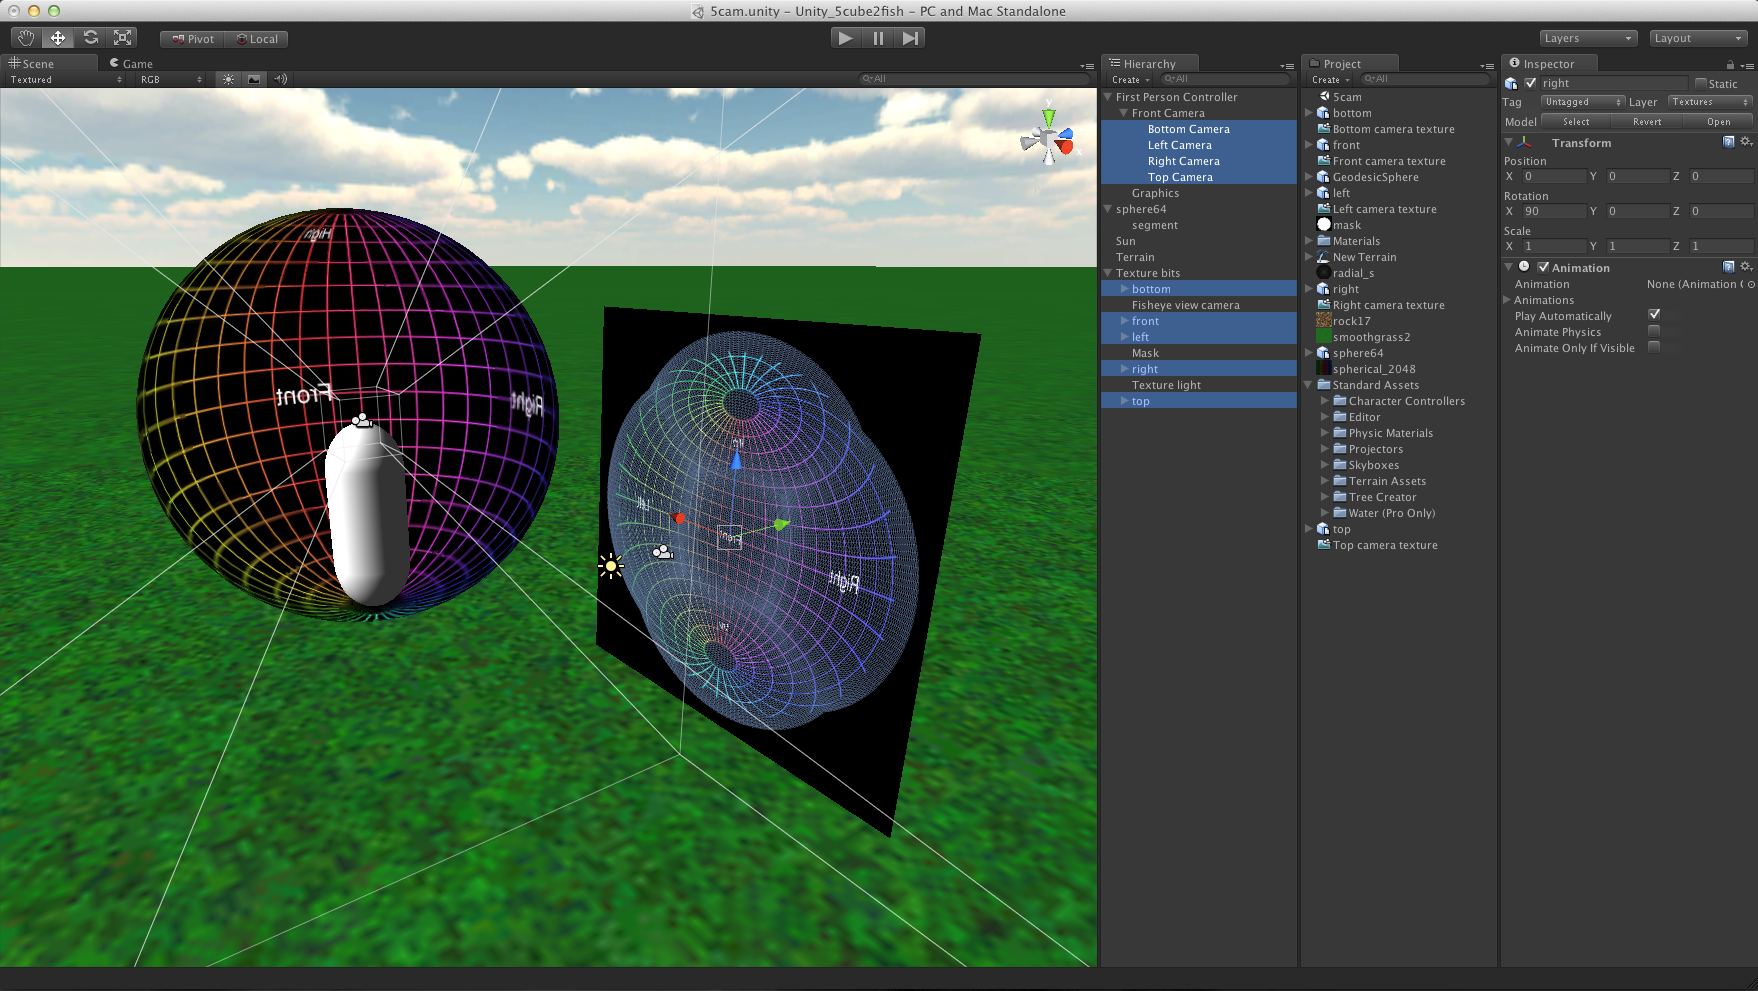 Creating fisheye views with the Unity3D engine